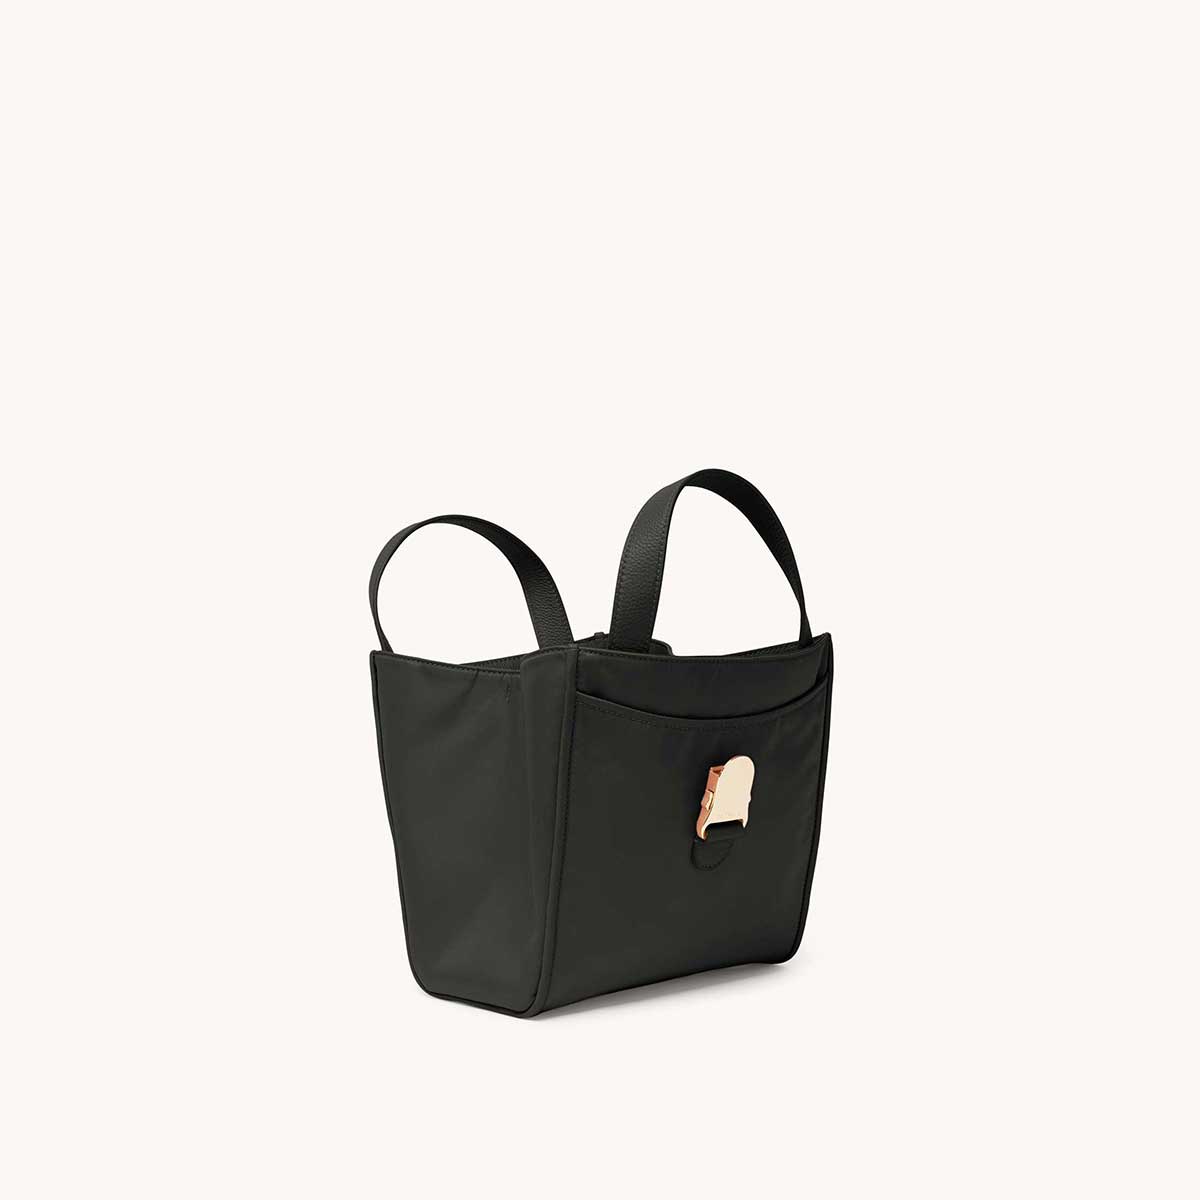 Strati Shopper Nylon RosÃ© with Gold Hardware Open & Front at an Angle
